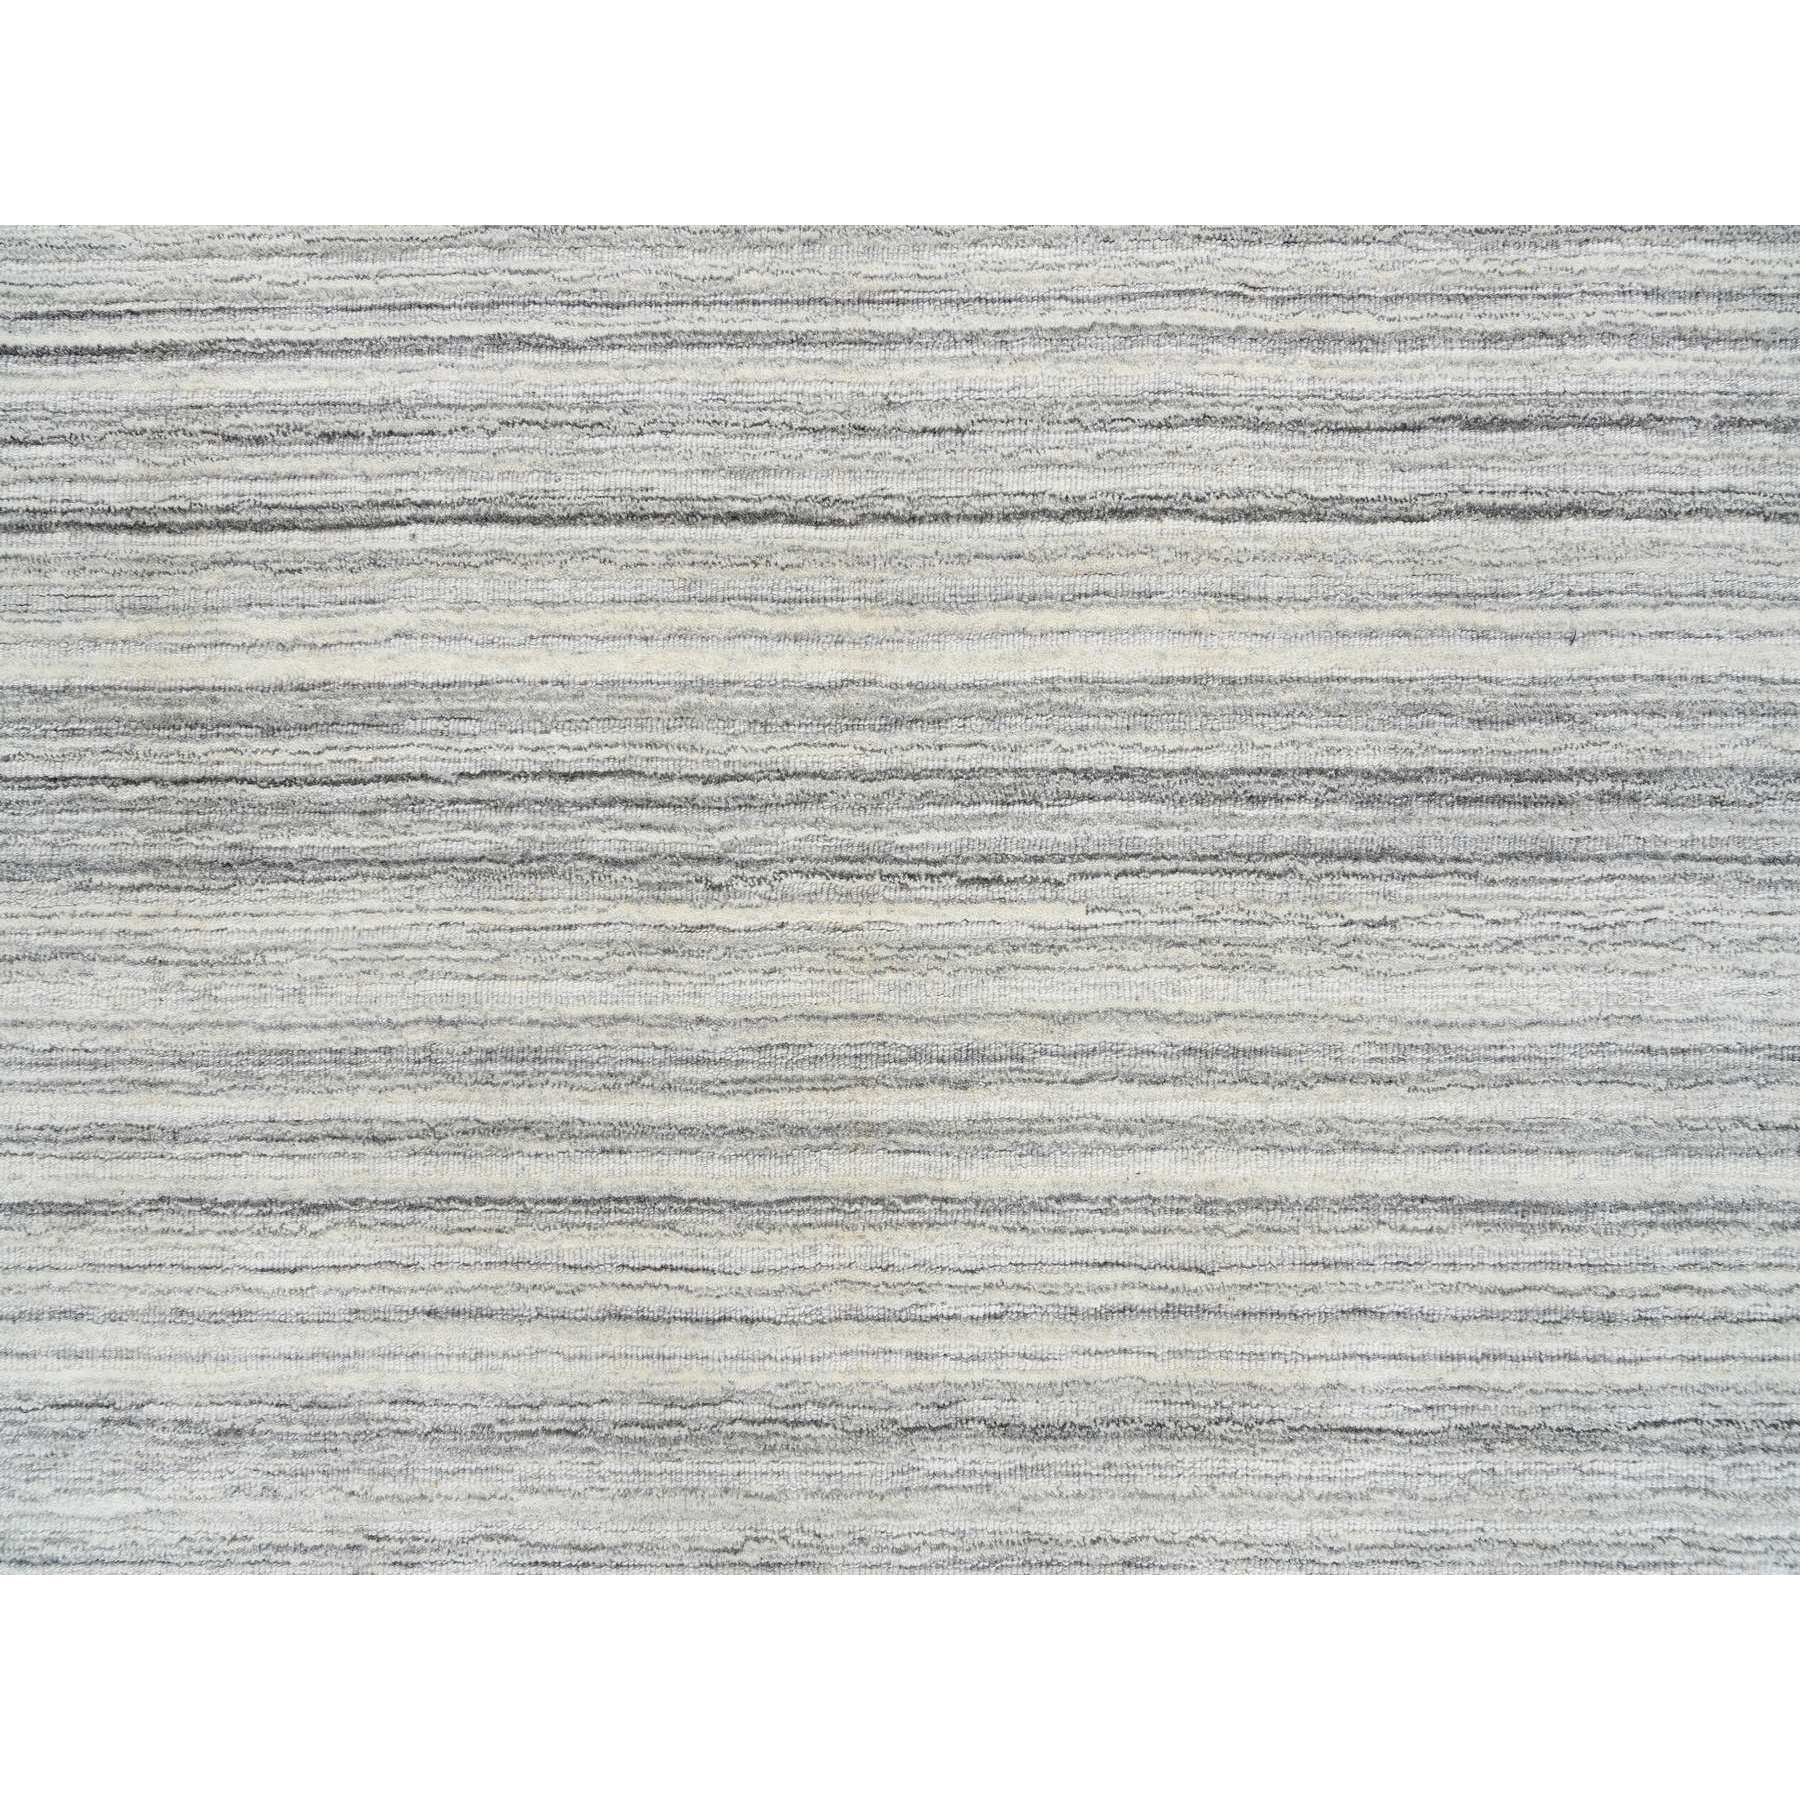 5'10"x5'10" Platinum Gray and Cream, Plain Hand Loomed Undyed Natural Wool, Modern Design Thick and Plush, Round Oriental Rug 